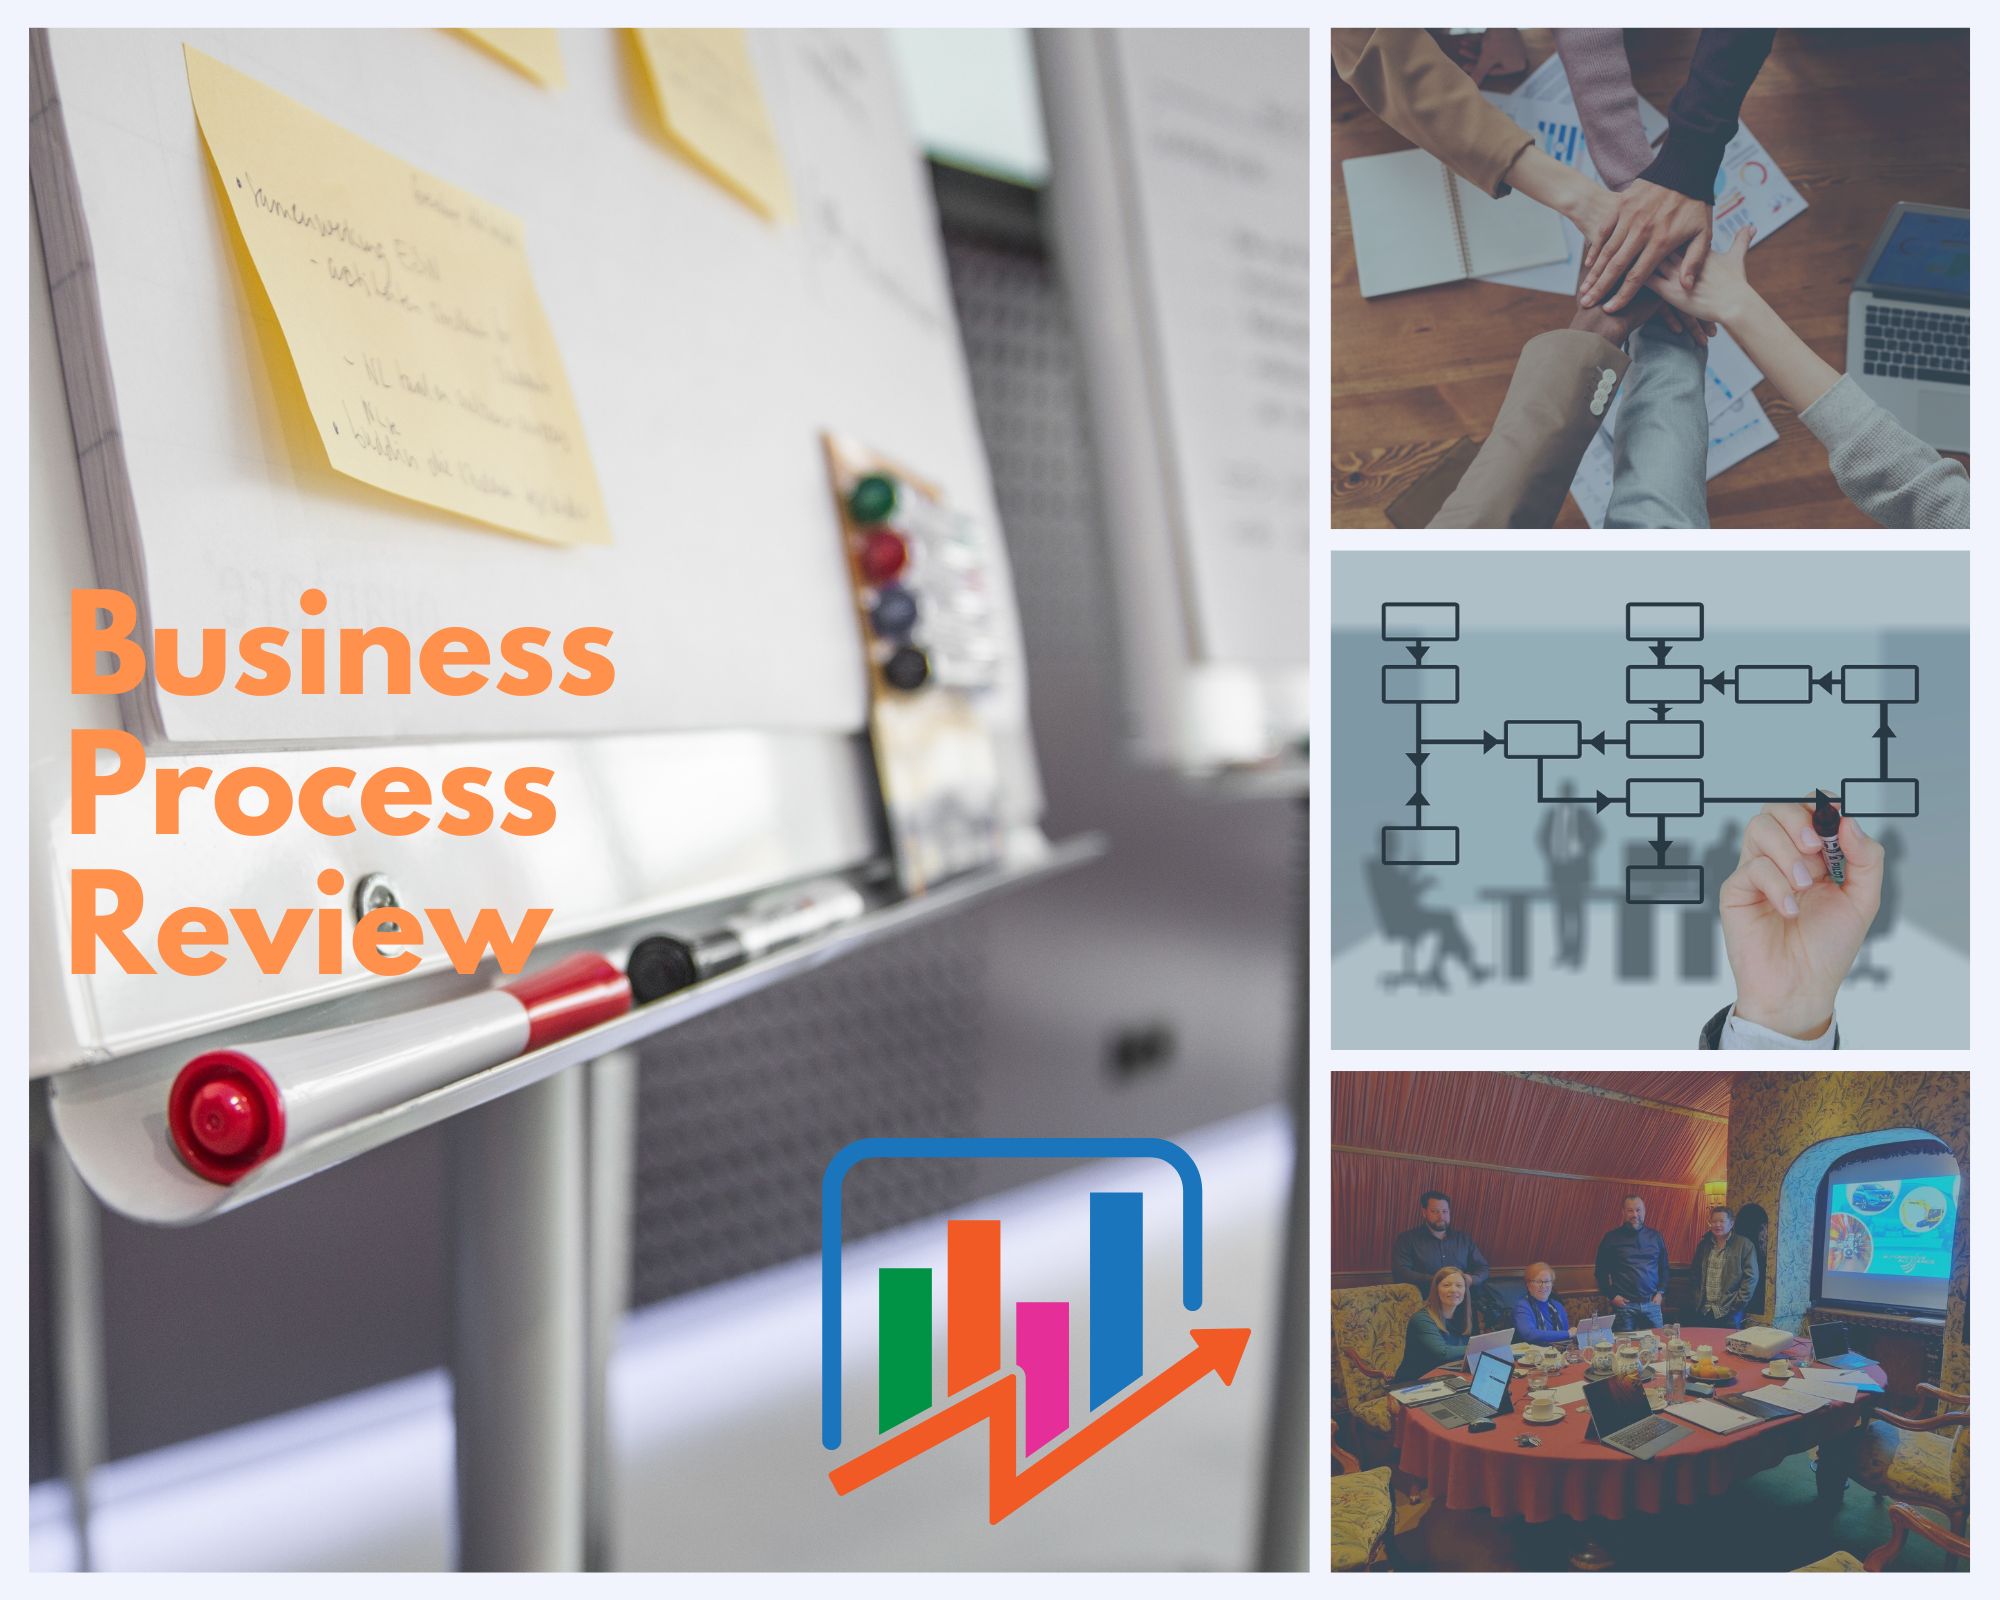 Business Process Review Workshops